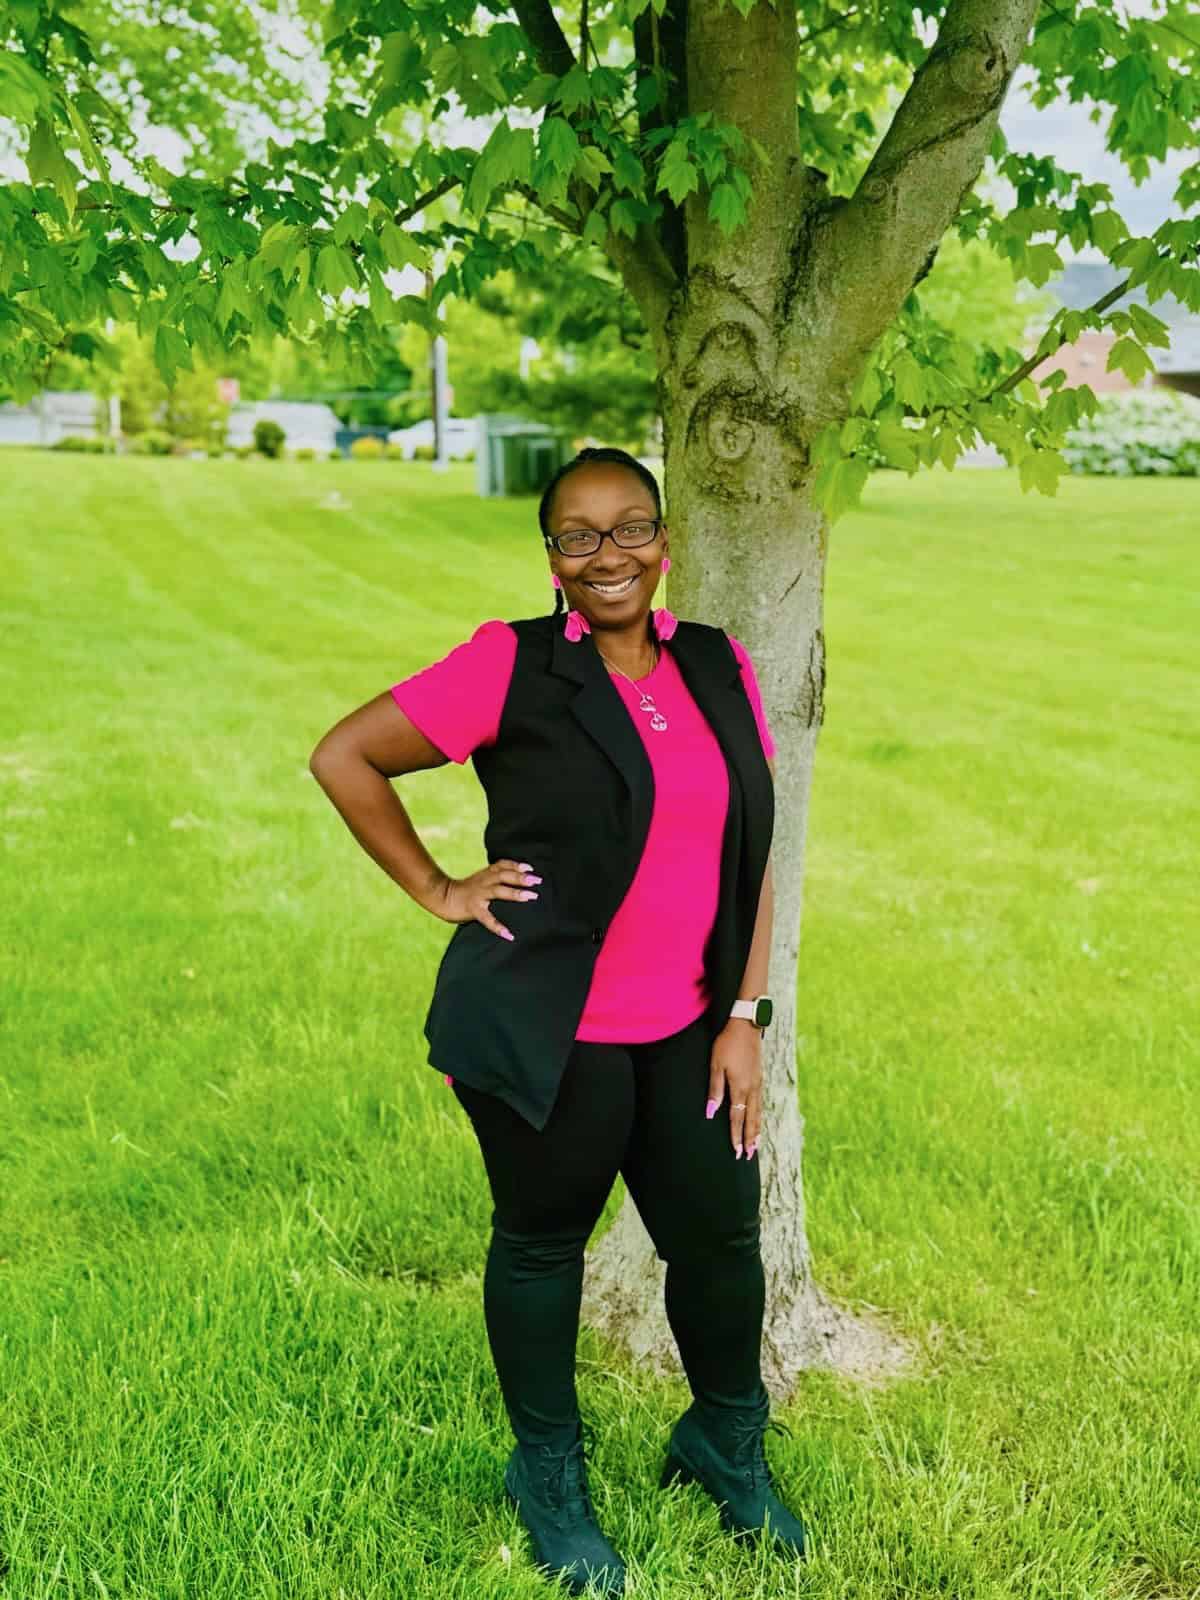 Woman in black and pink outfit standing confidently by a tree on a grassy lawn, smiling at the camera.